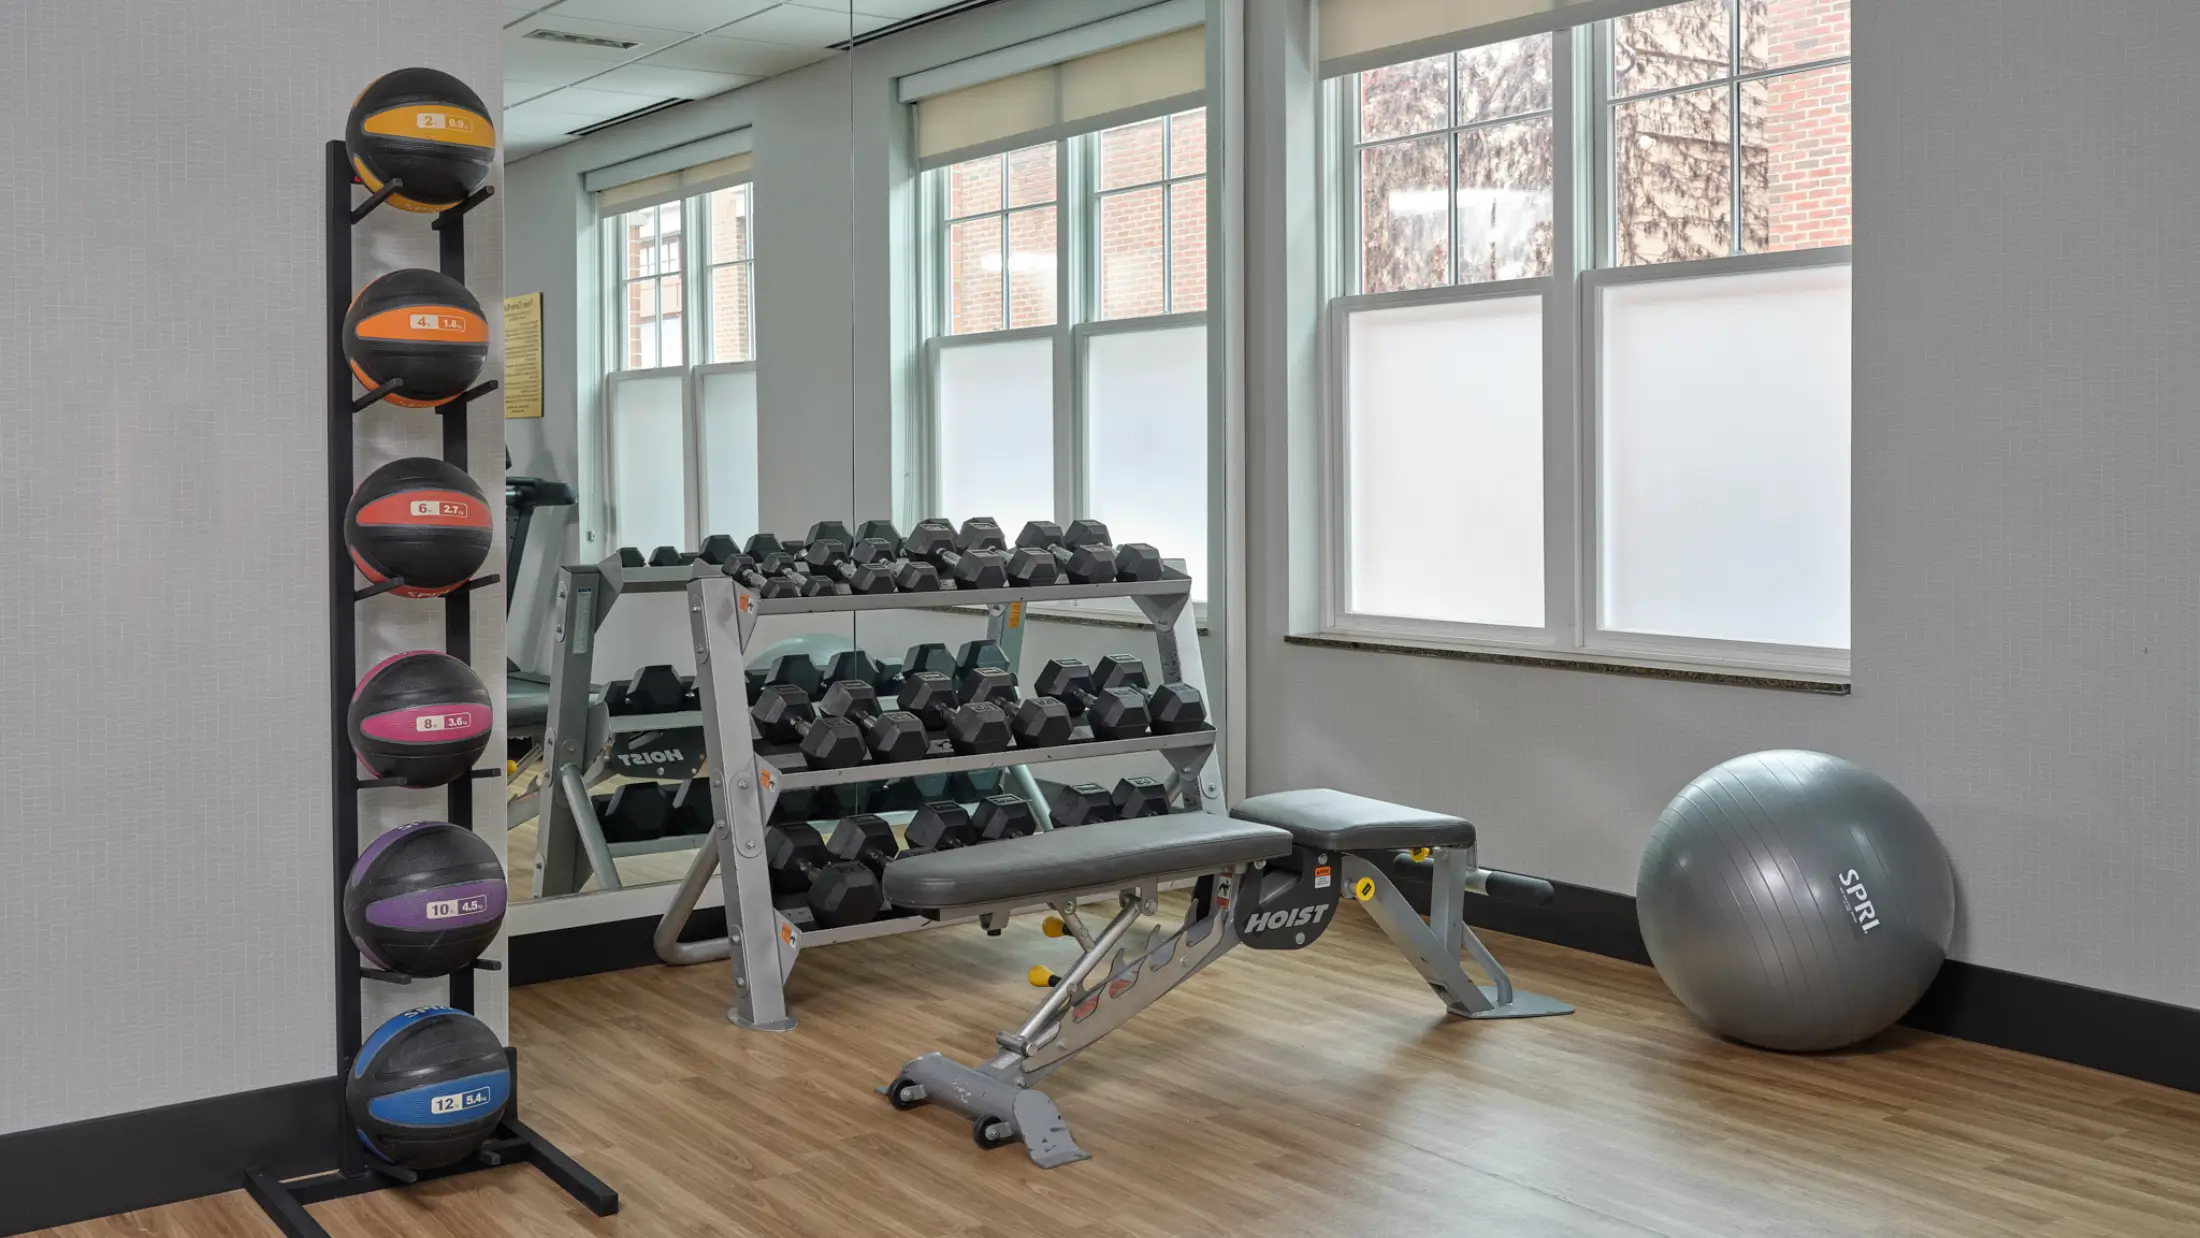 Array of free weights and medicine balls in the fitness room at Six South St Hotel in Hanover, NH.